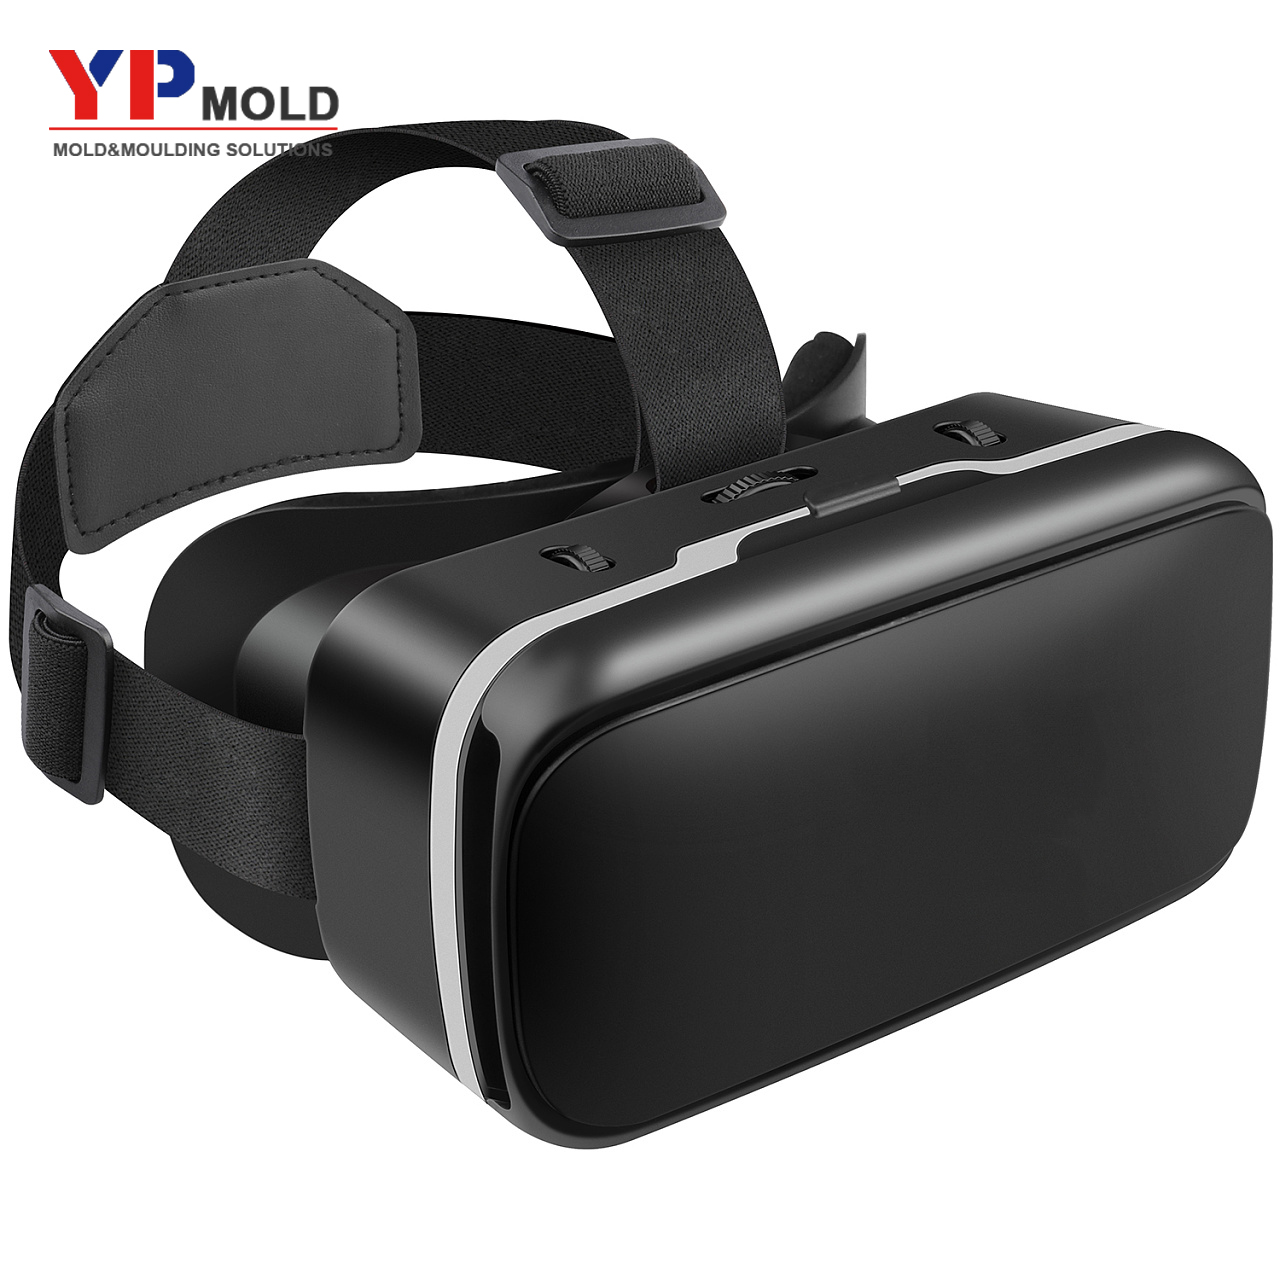 3D virtual reality monitor VR glasses equipment injection shell mold